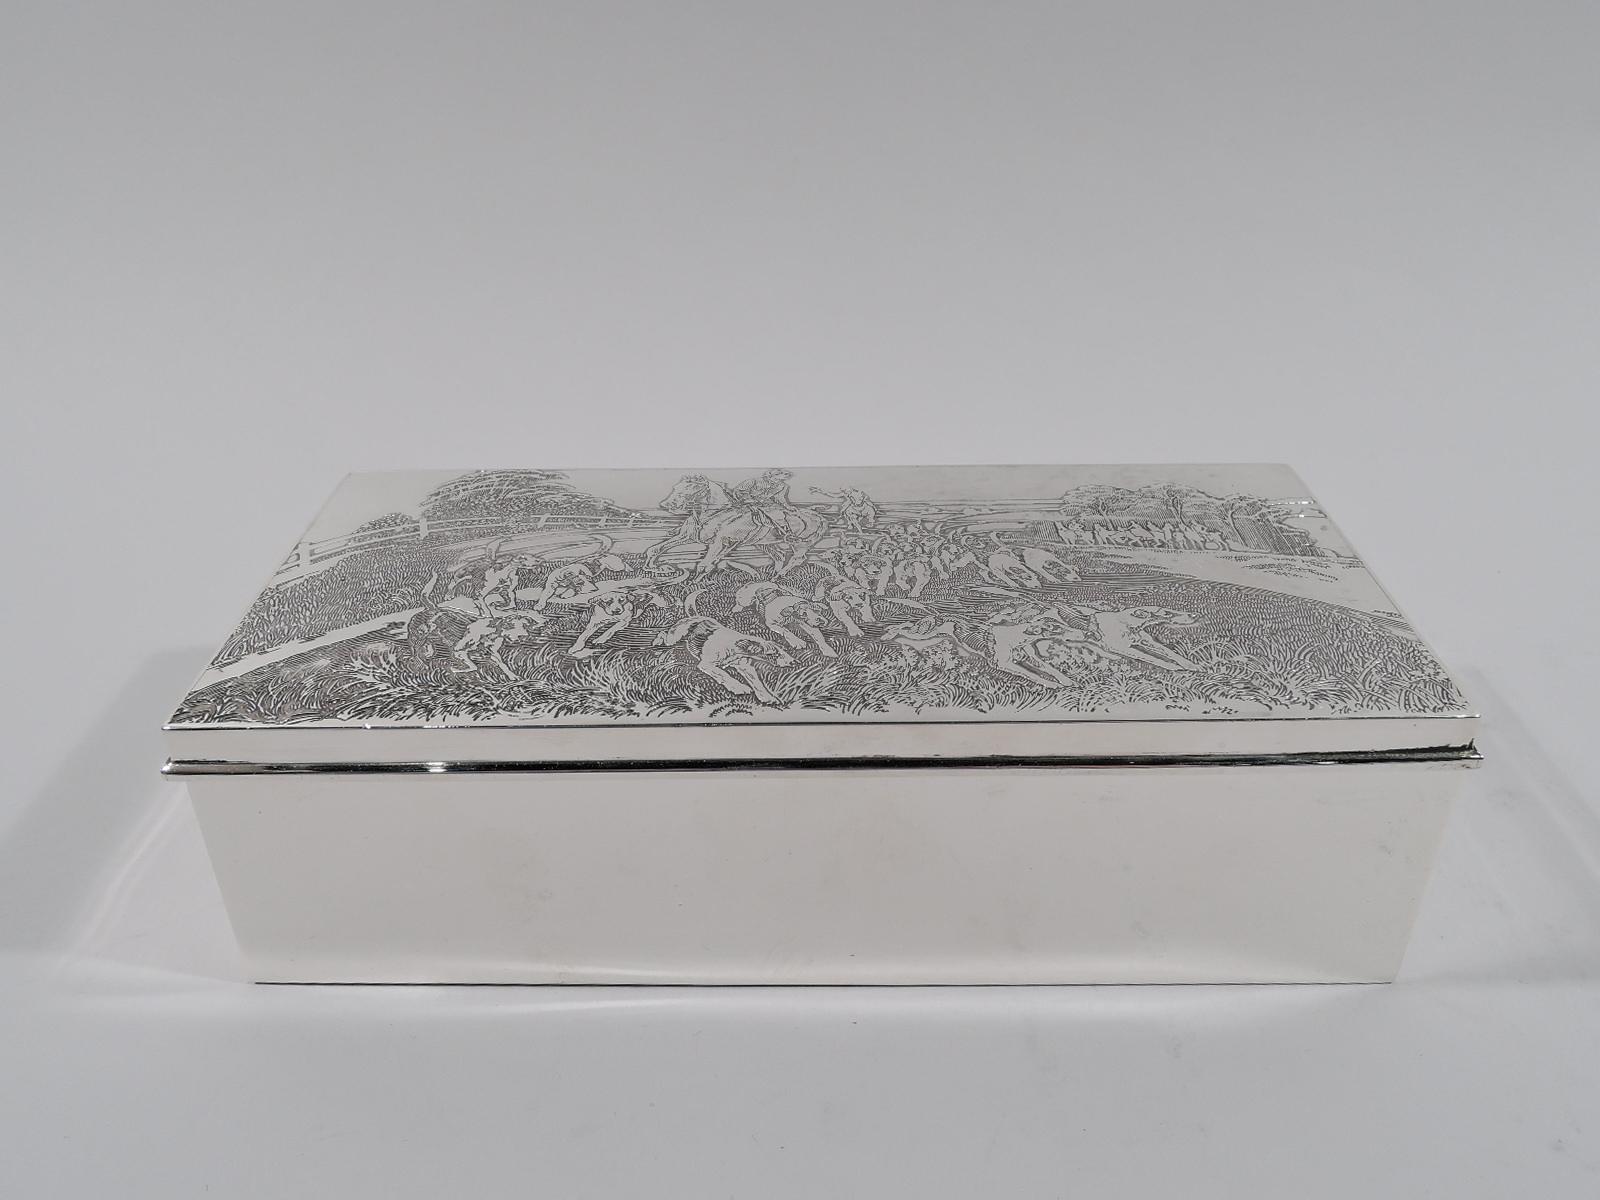 Edwardian sterling silver box. Made by McChesney in New York, circa 1920. Rectangular with straight sides. Cover hinged with wraparound flat rim. On cover is acid-etched fox hunt scene: A rider looks around with the pack on the scent; a second rider